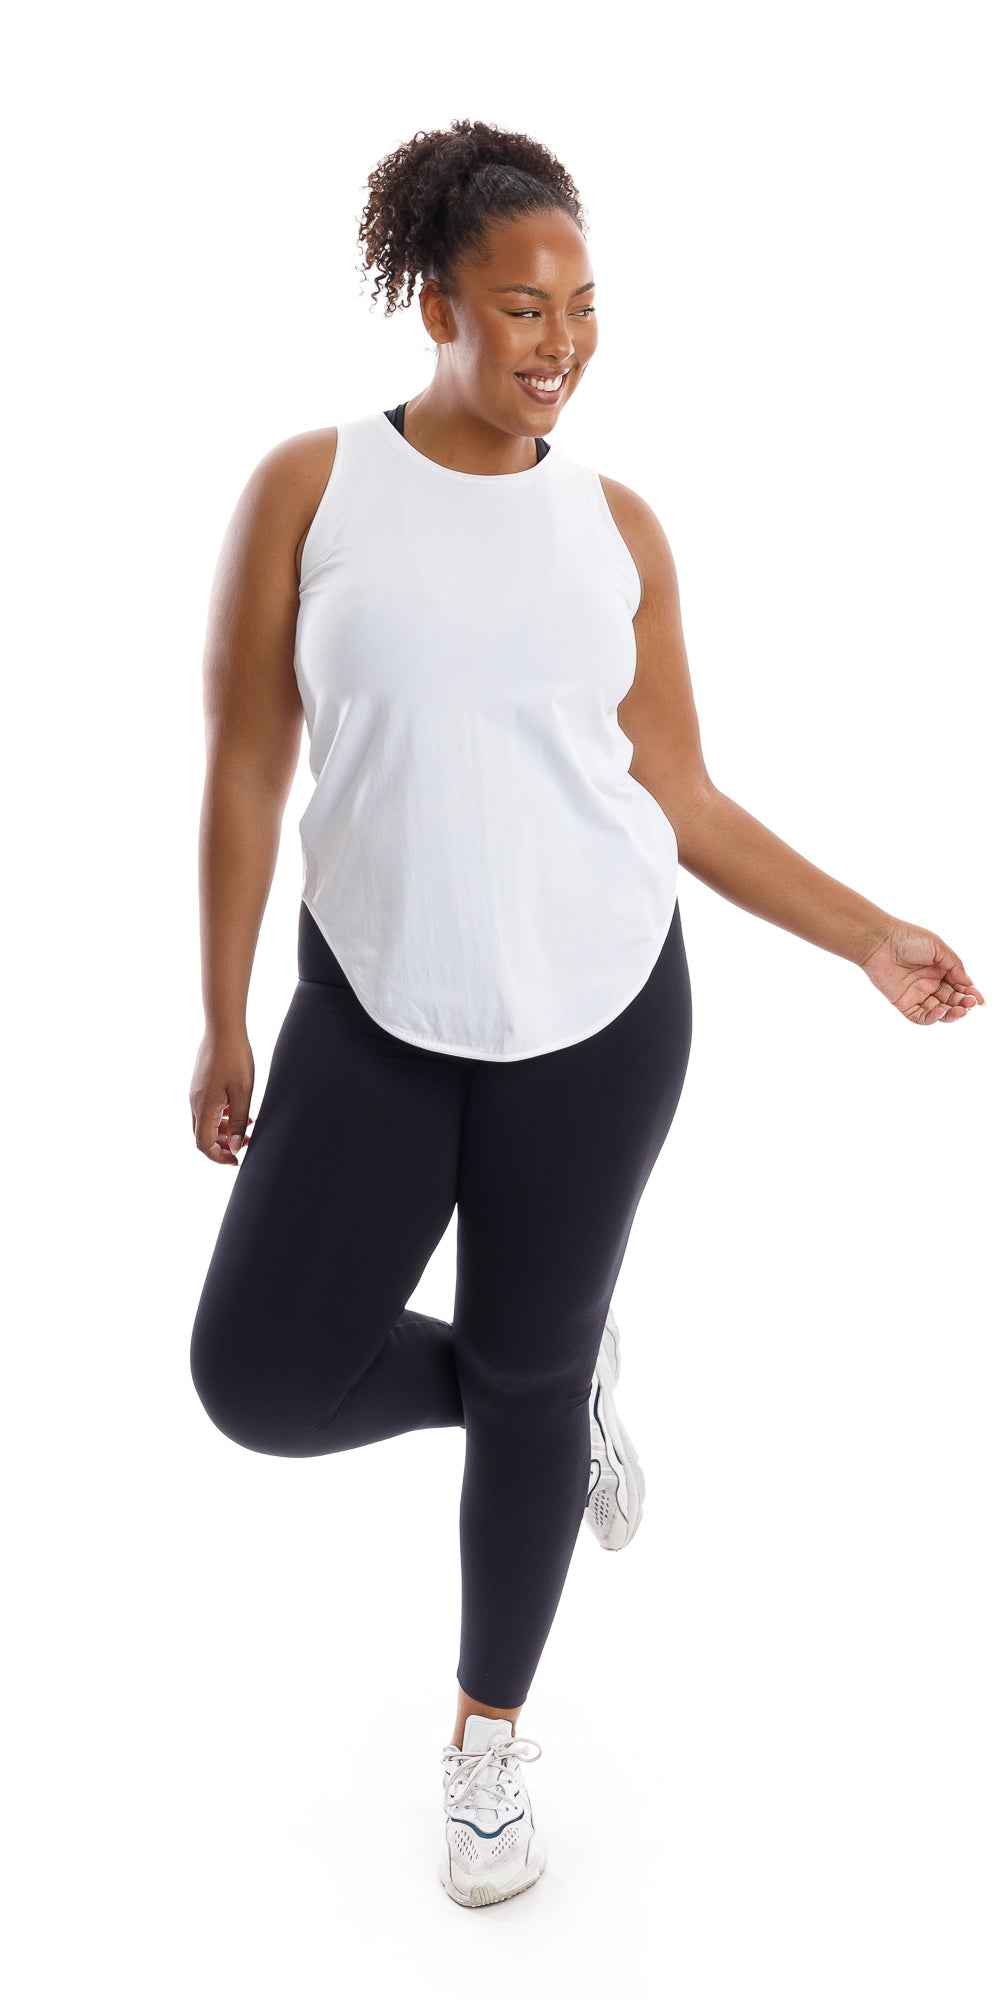 Full body front view of lady in sleeveless White Palm Beach Tank and black leggings standing on left leg lifting right leg crossing it behind while swaying arms and smiling